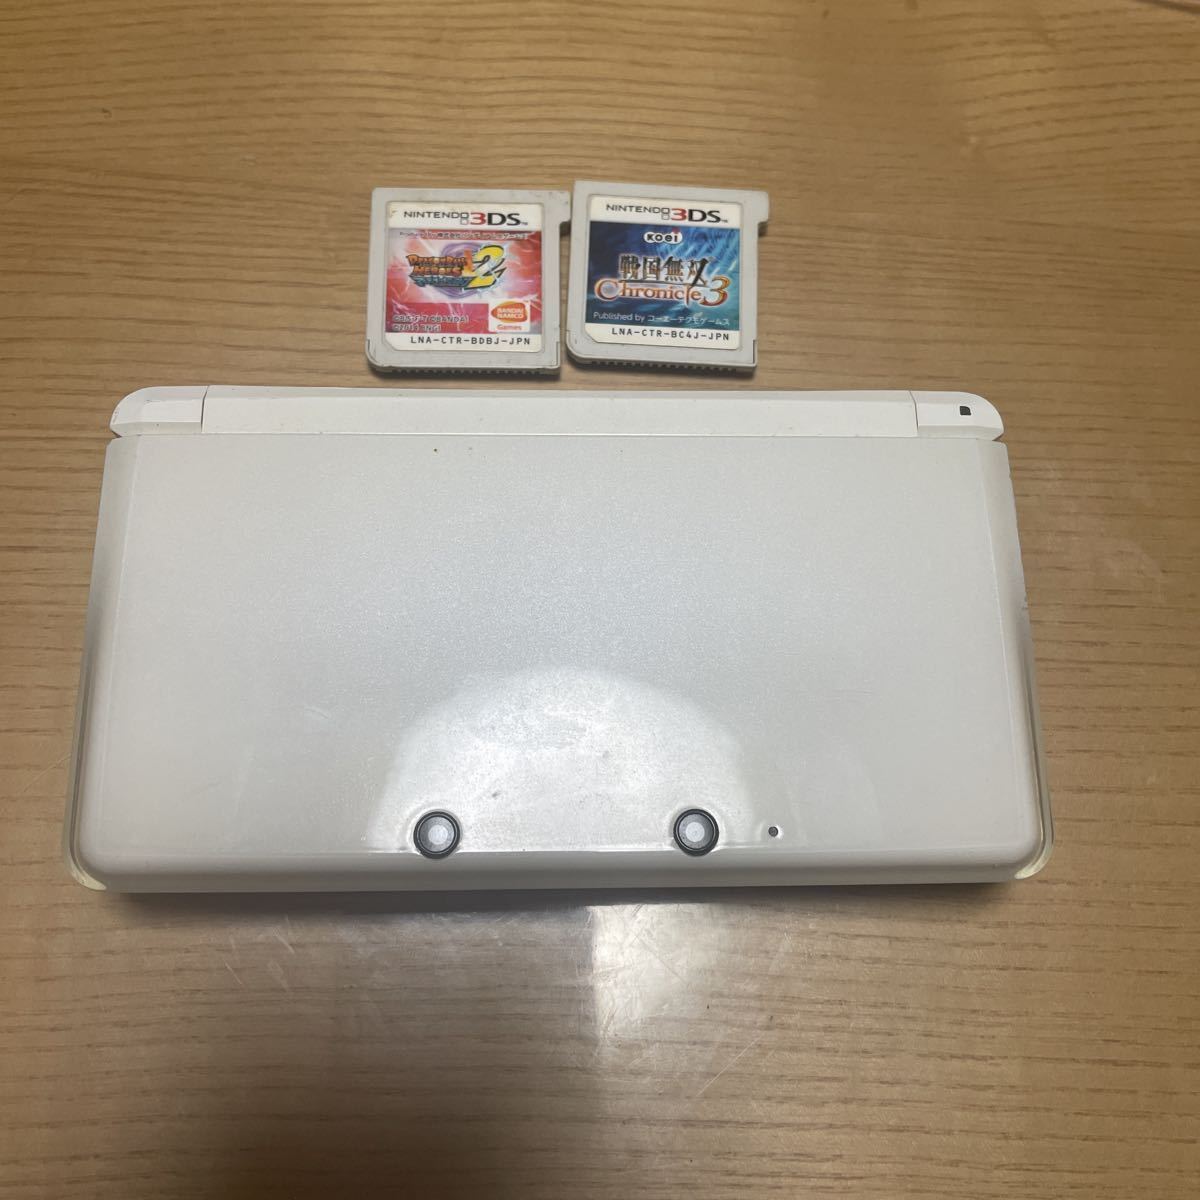  Nintendo 3DS white soft 2 sheets attaching 